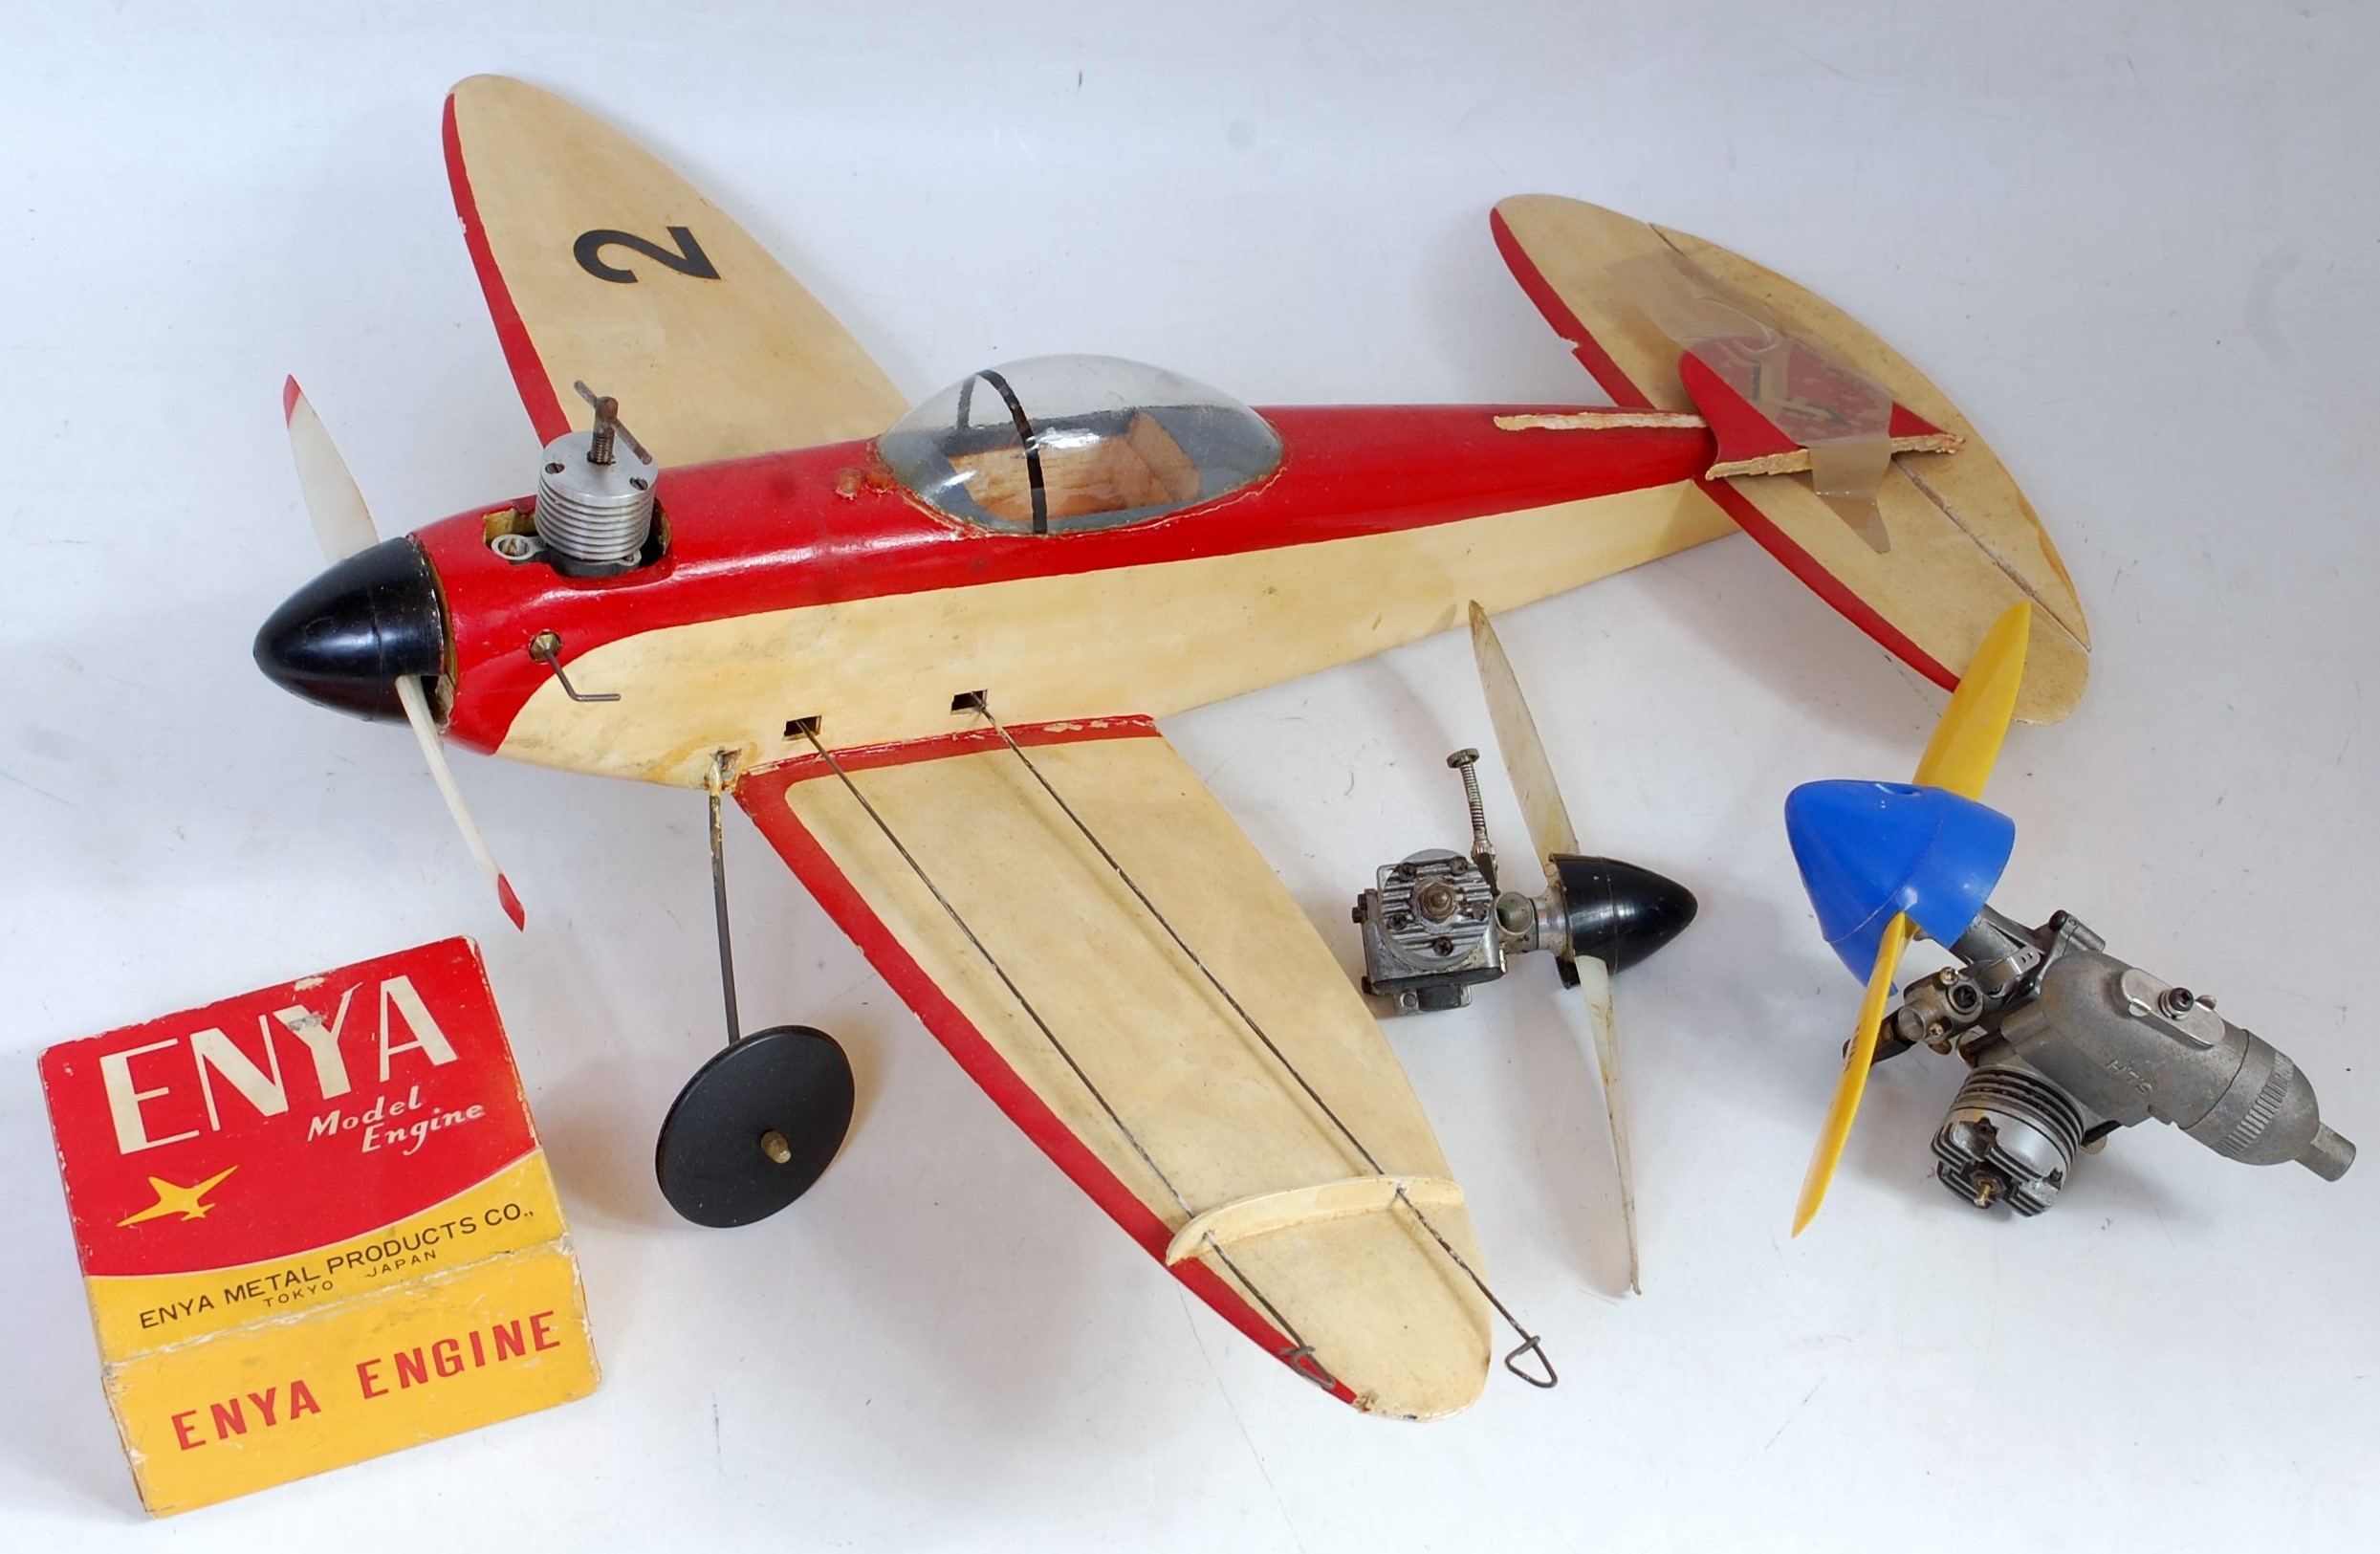 A balsa wood and plastic kit built petrol powered radio controlled aircraft, sold with a quantity of